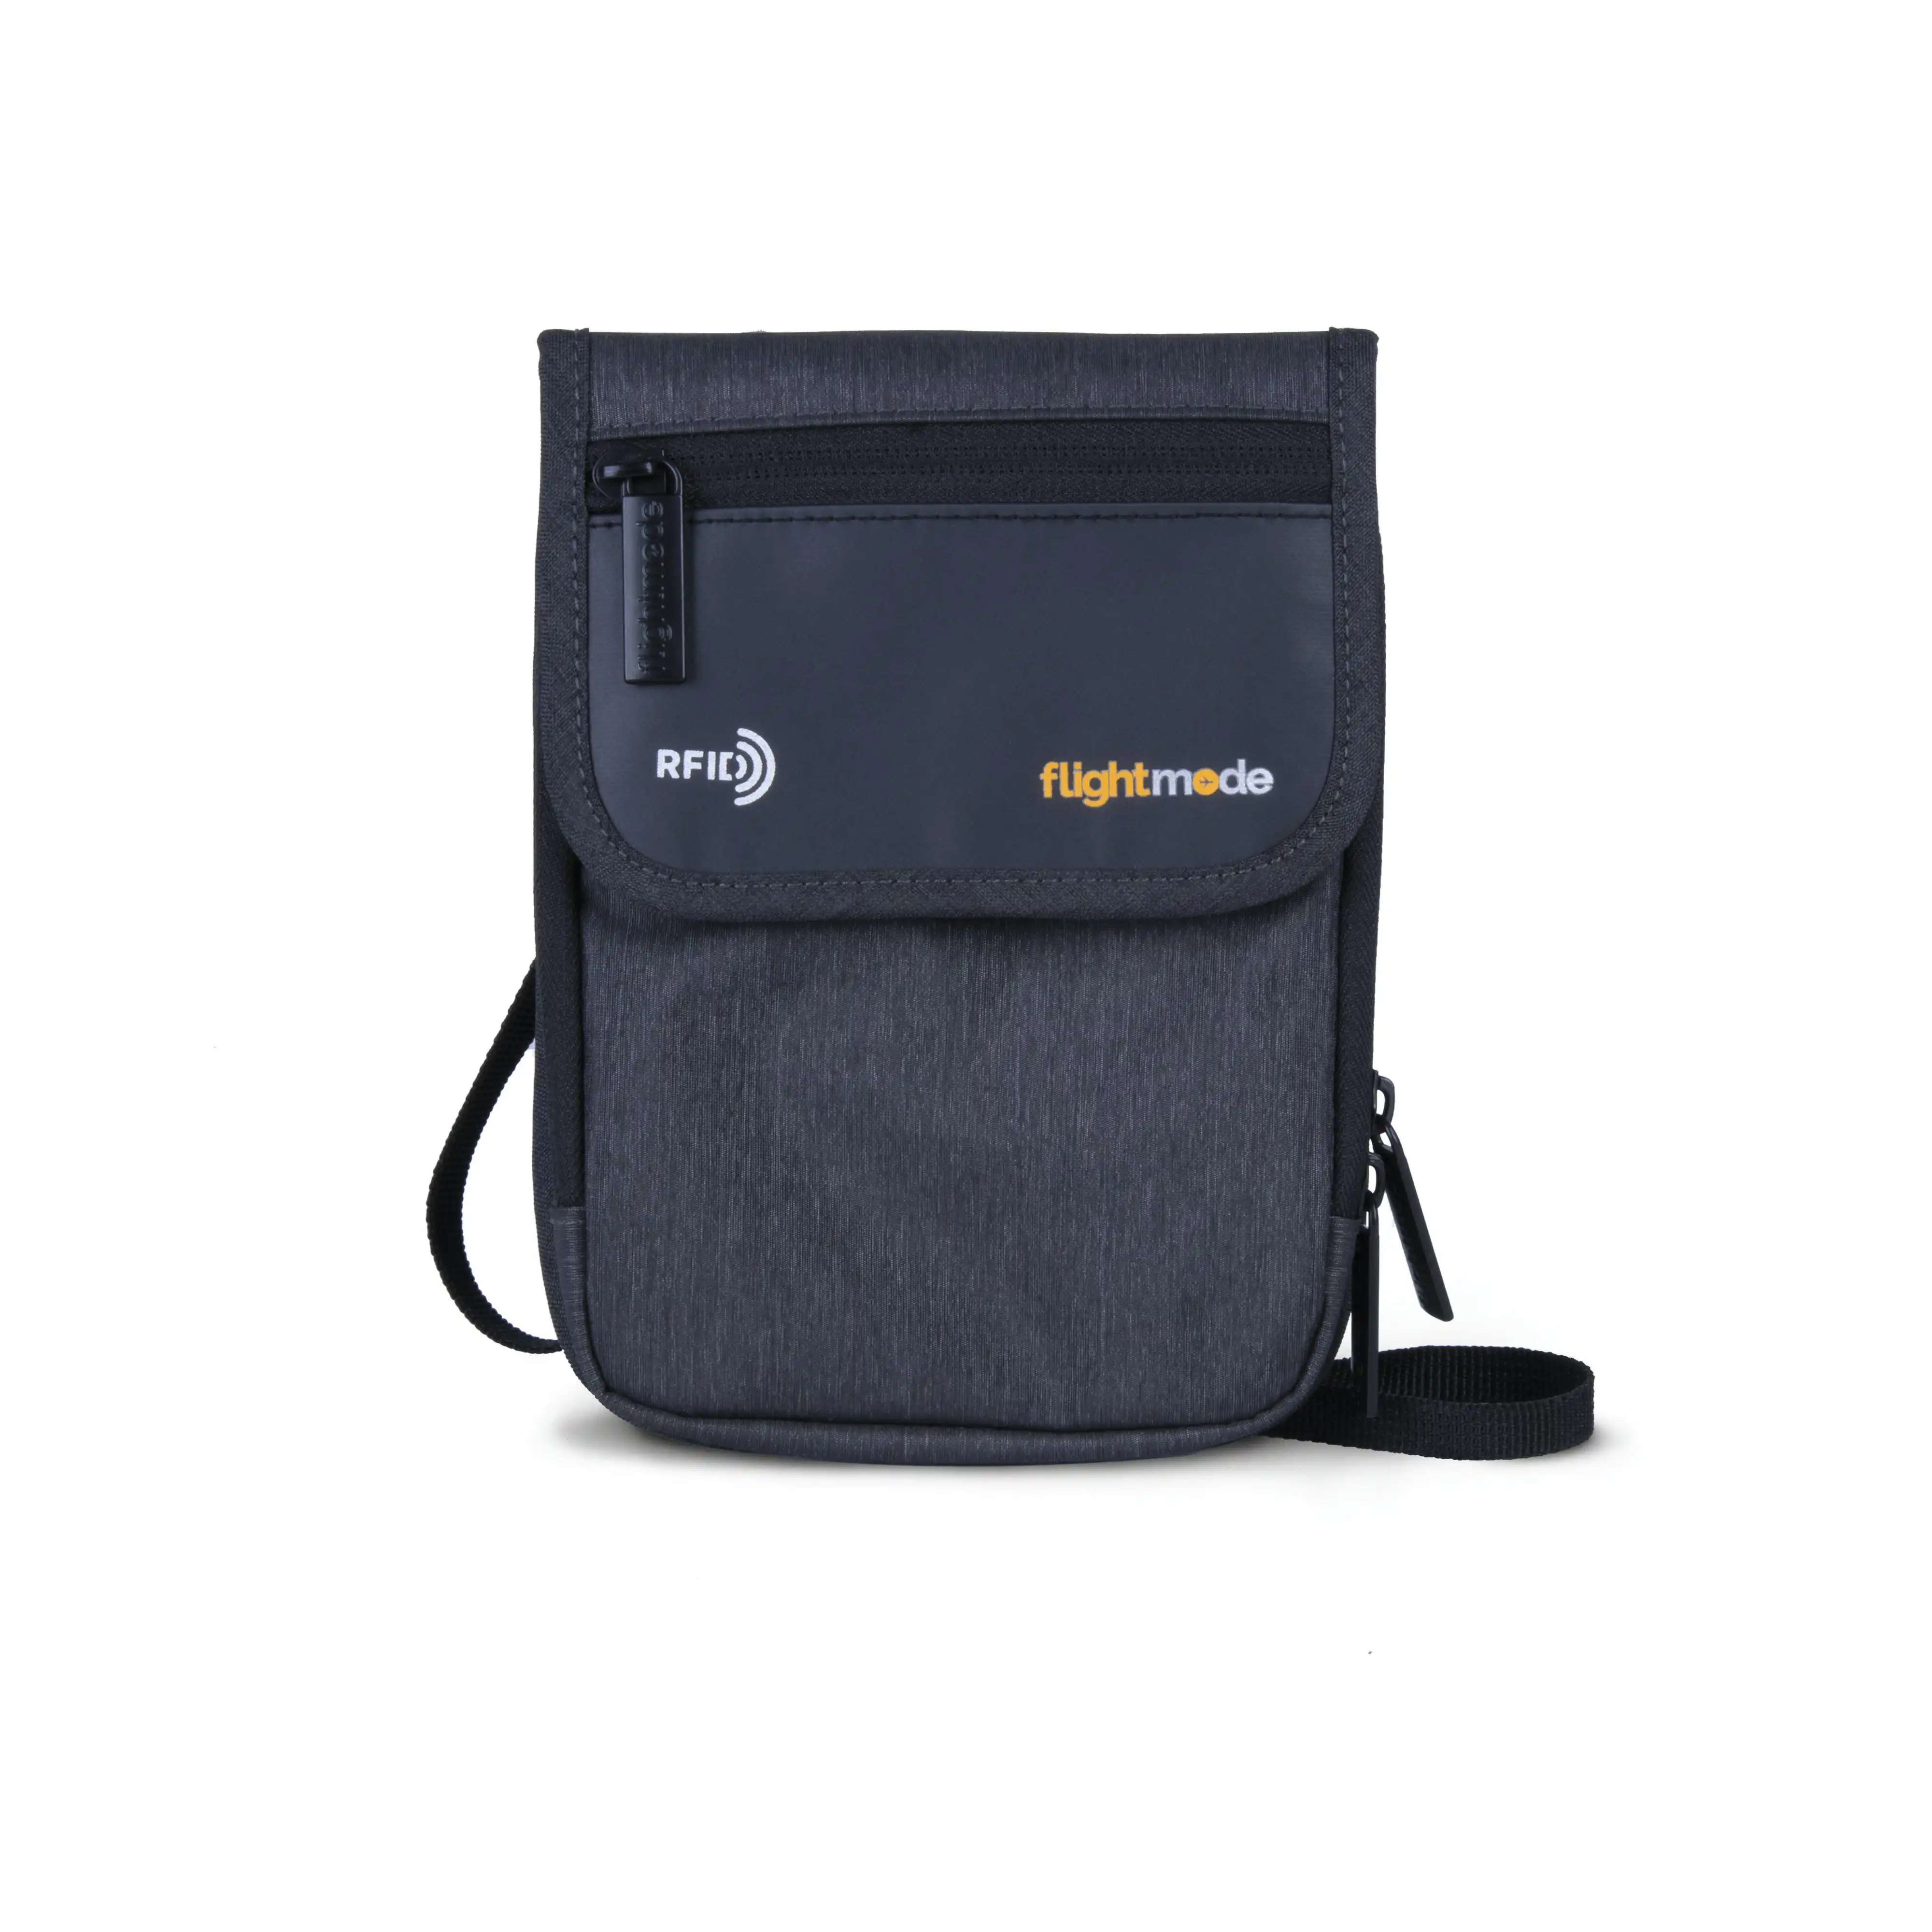 Flightmode RFID Neck Pouch - Charcoal